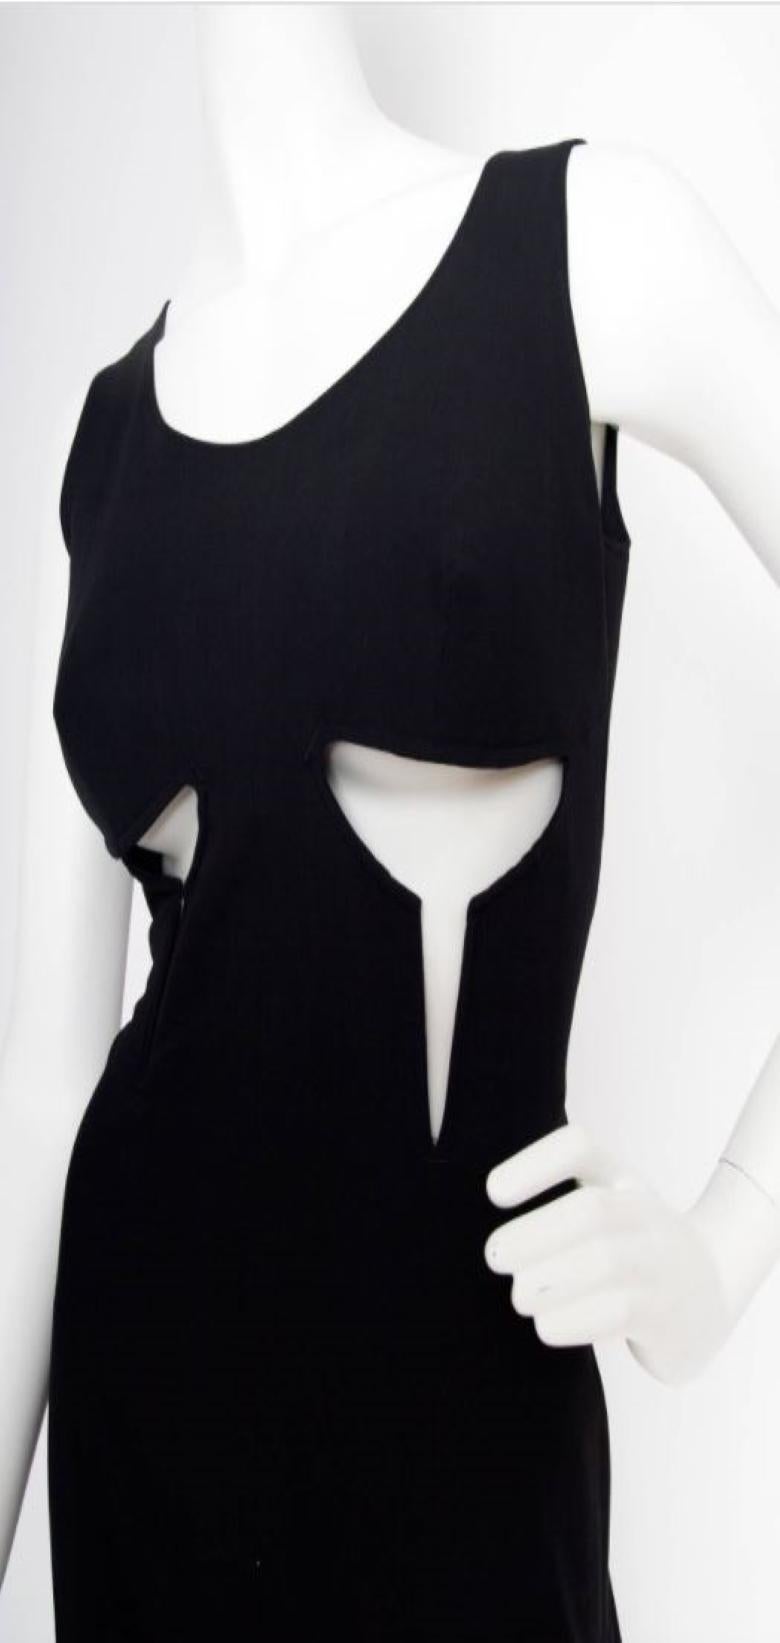 Jean Paul Gaultier Runway Cut Out Cutout Couture Breast SS 1993 Black Dress For Sale 2